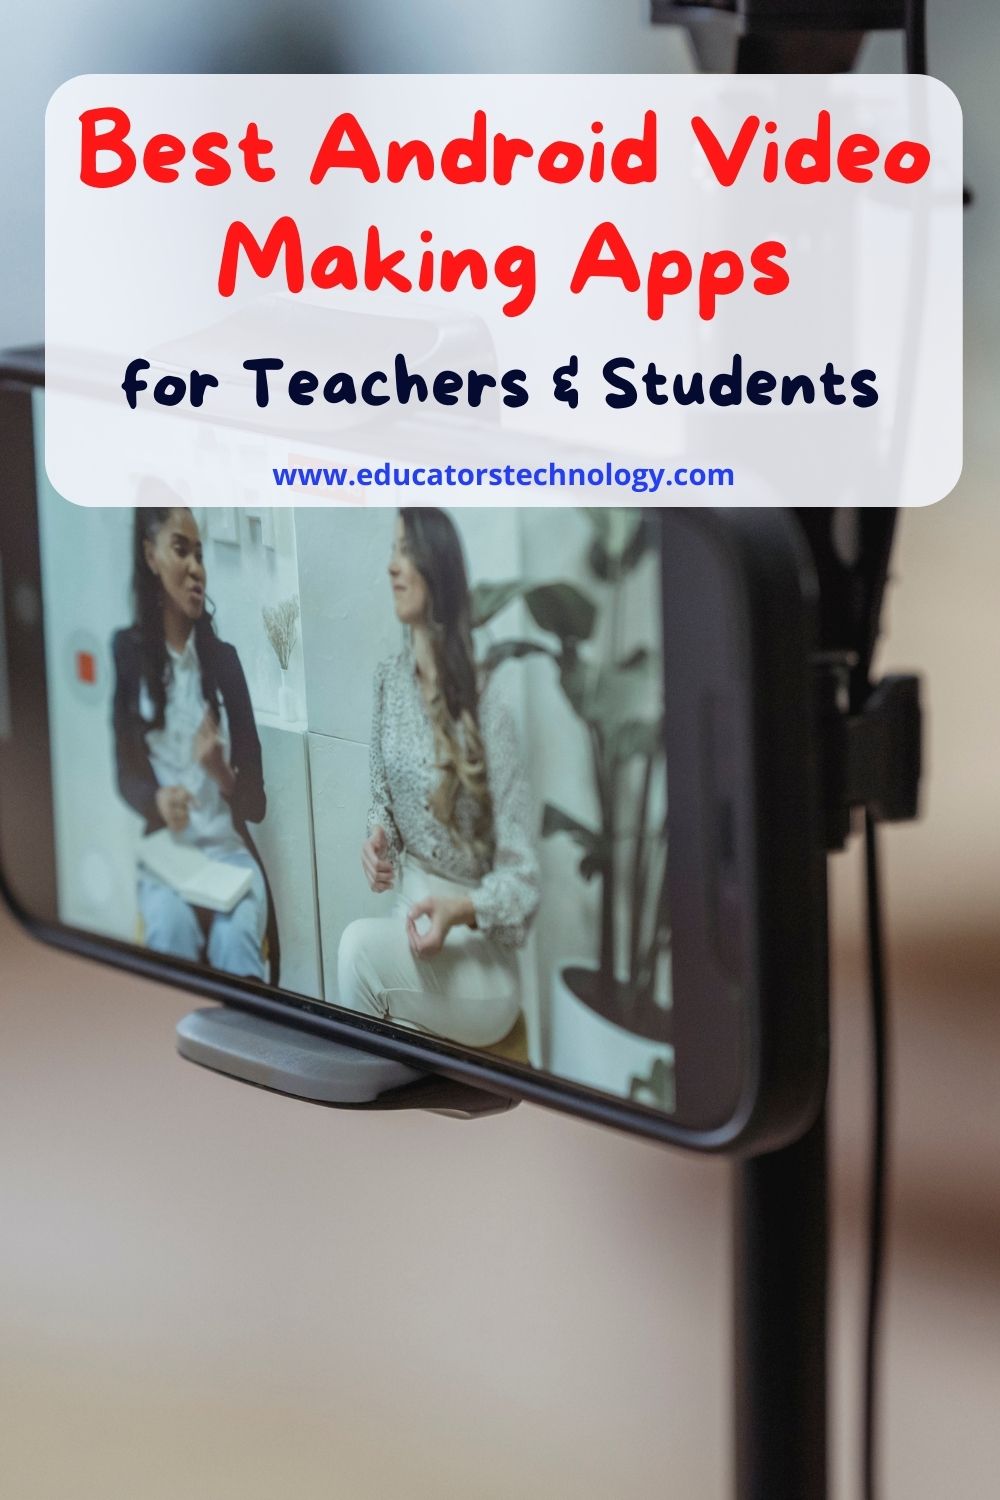 6 Great Android Video Making and Editing Apps for Teachers and Students